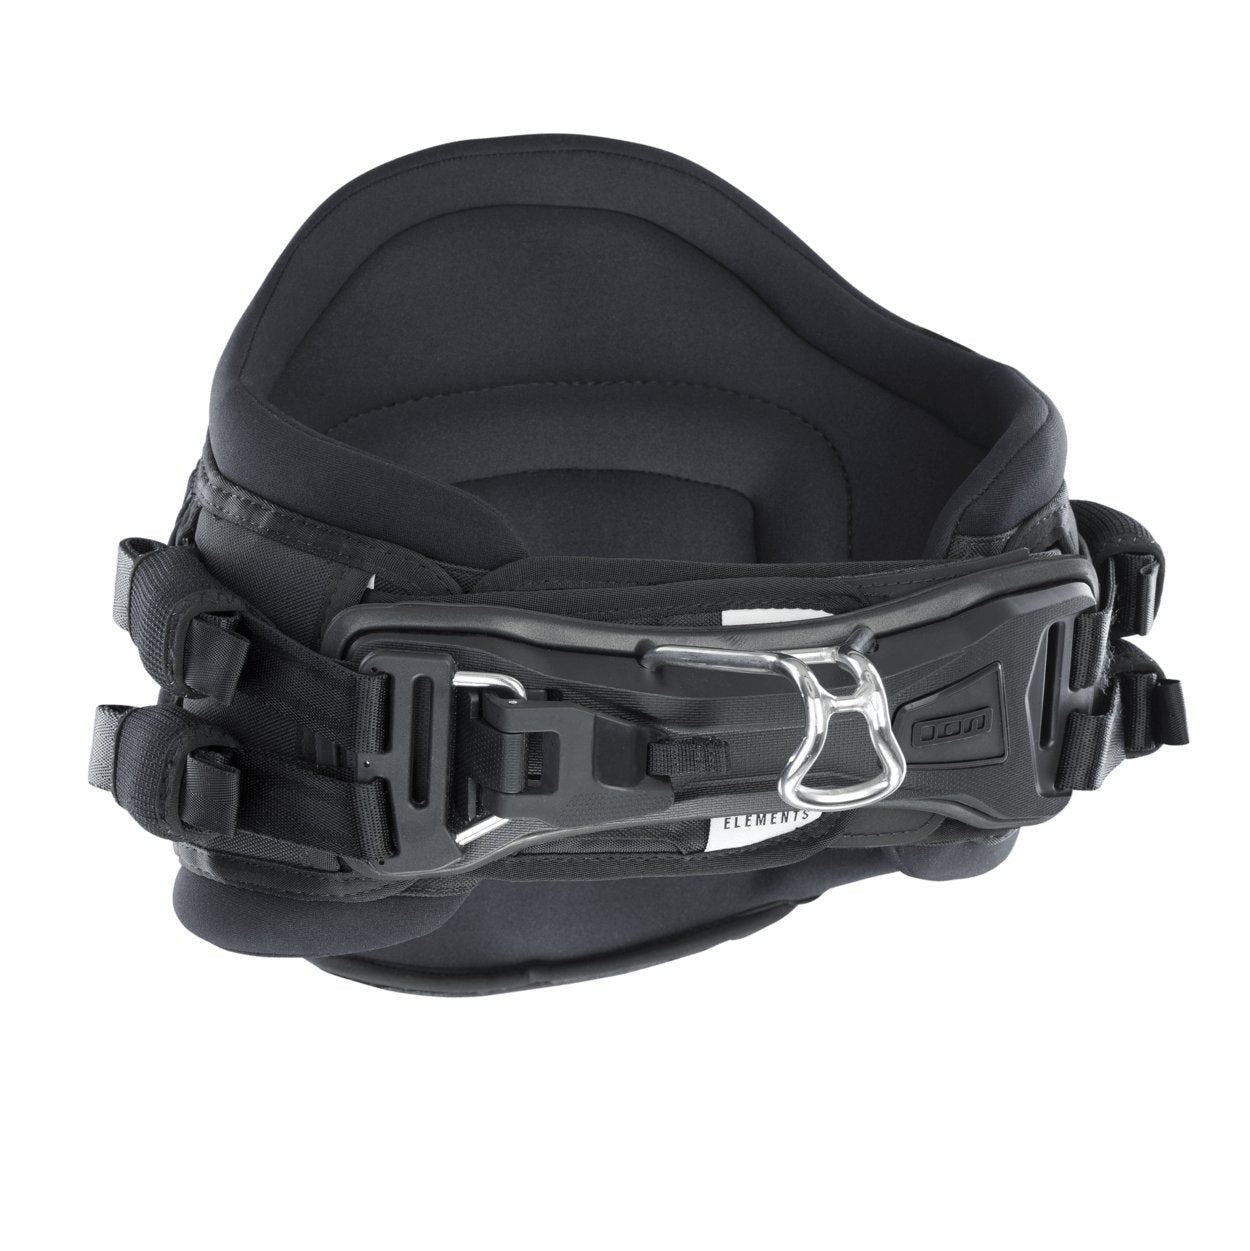 ION Axxis Kite Harness Men 2022 - Worthing Watersports - 9008415943821 - Harness - ION Water